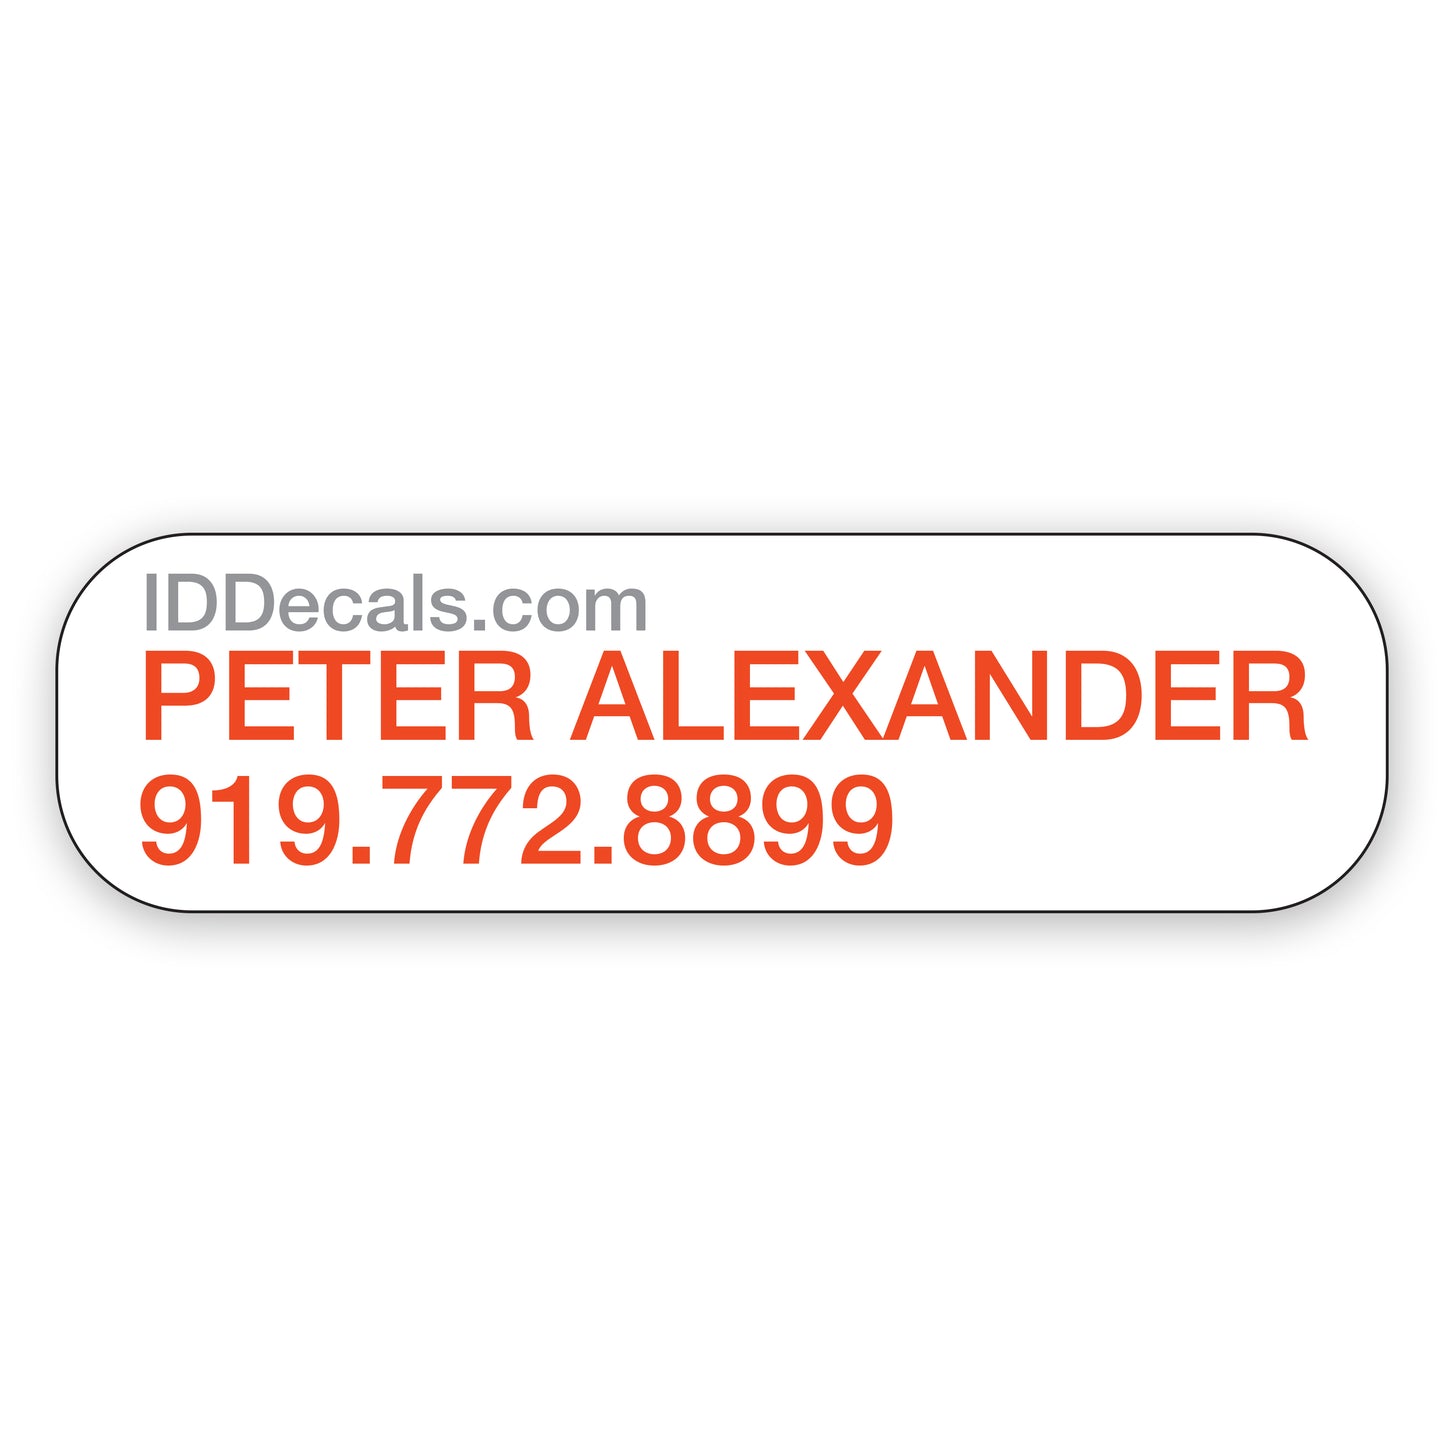 Premium vinyl identification sticker with customizable text, featuring two lines of personalized information - colored text on white background..